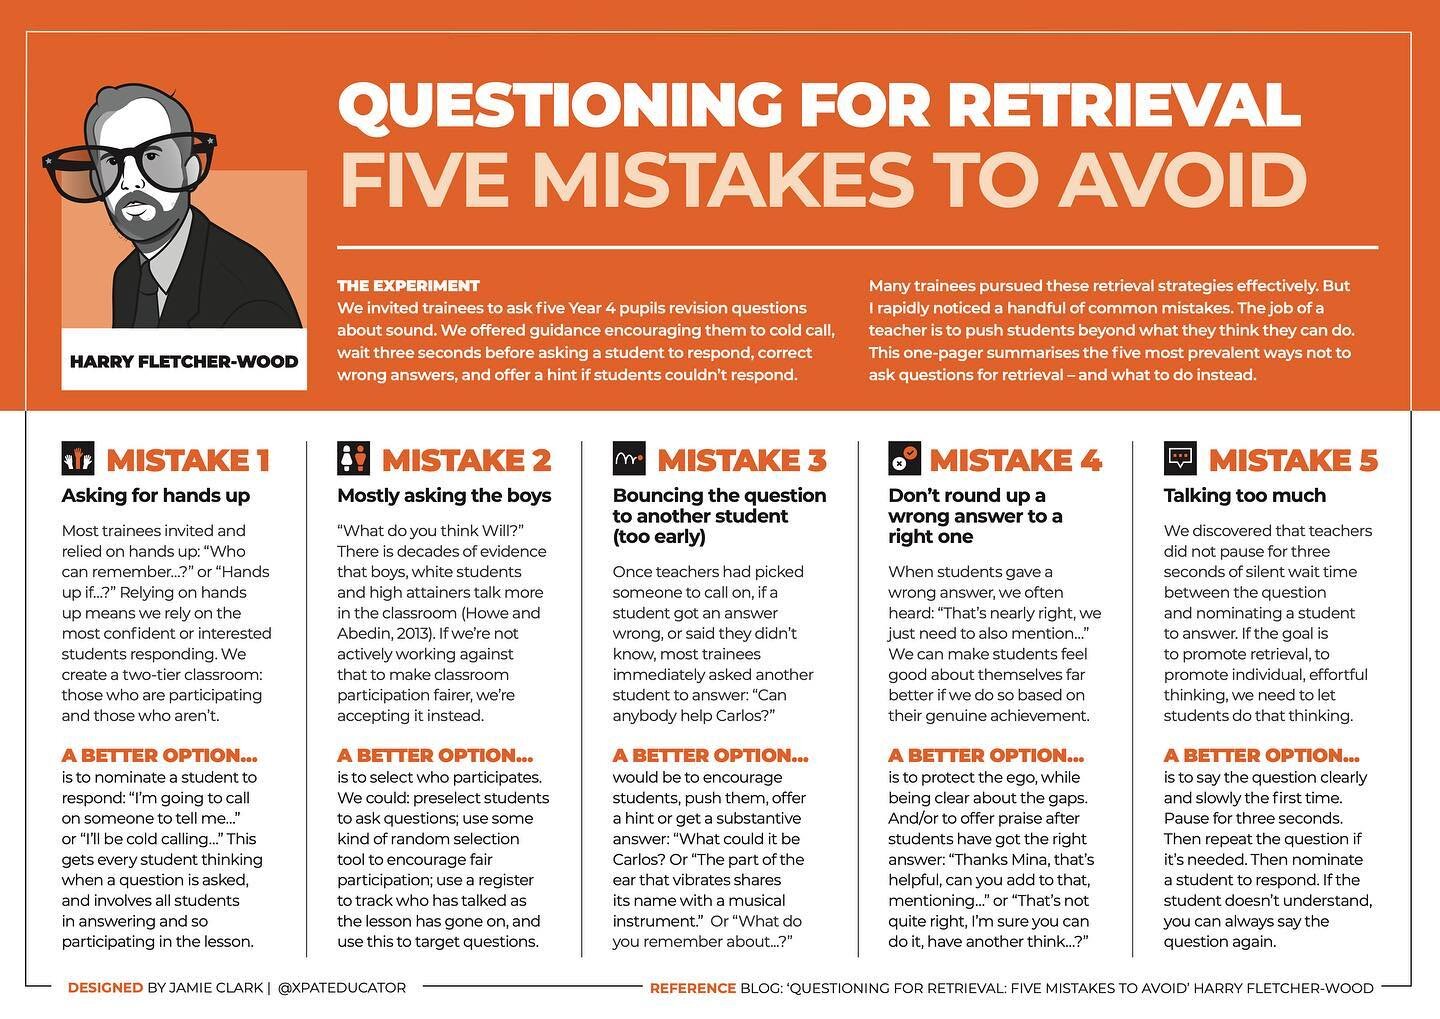 This recent blog post, &lsquo;Questioning for Retrieval: 5 Mistakes to Avoid&rsquo; by Harry Fletcher-Wood is a smasher. Here&rsquo;s a useful one page summary.